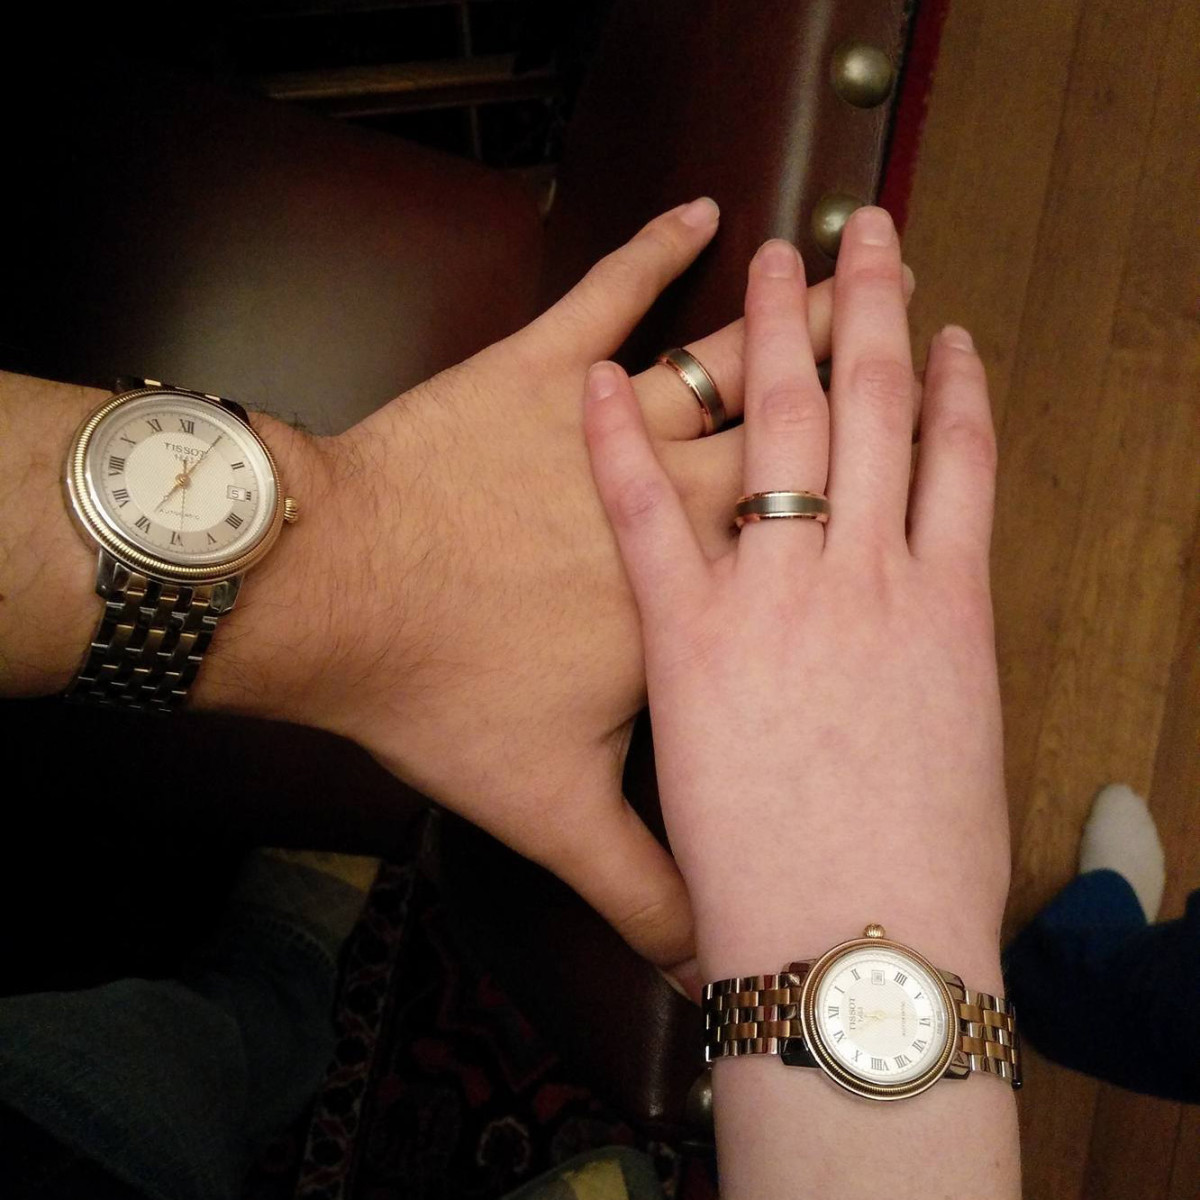 A picture of our wedding rings and matching watches that we included